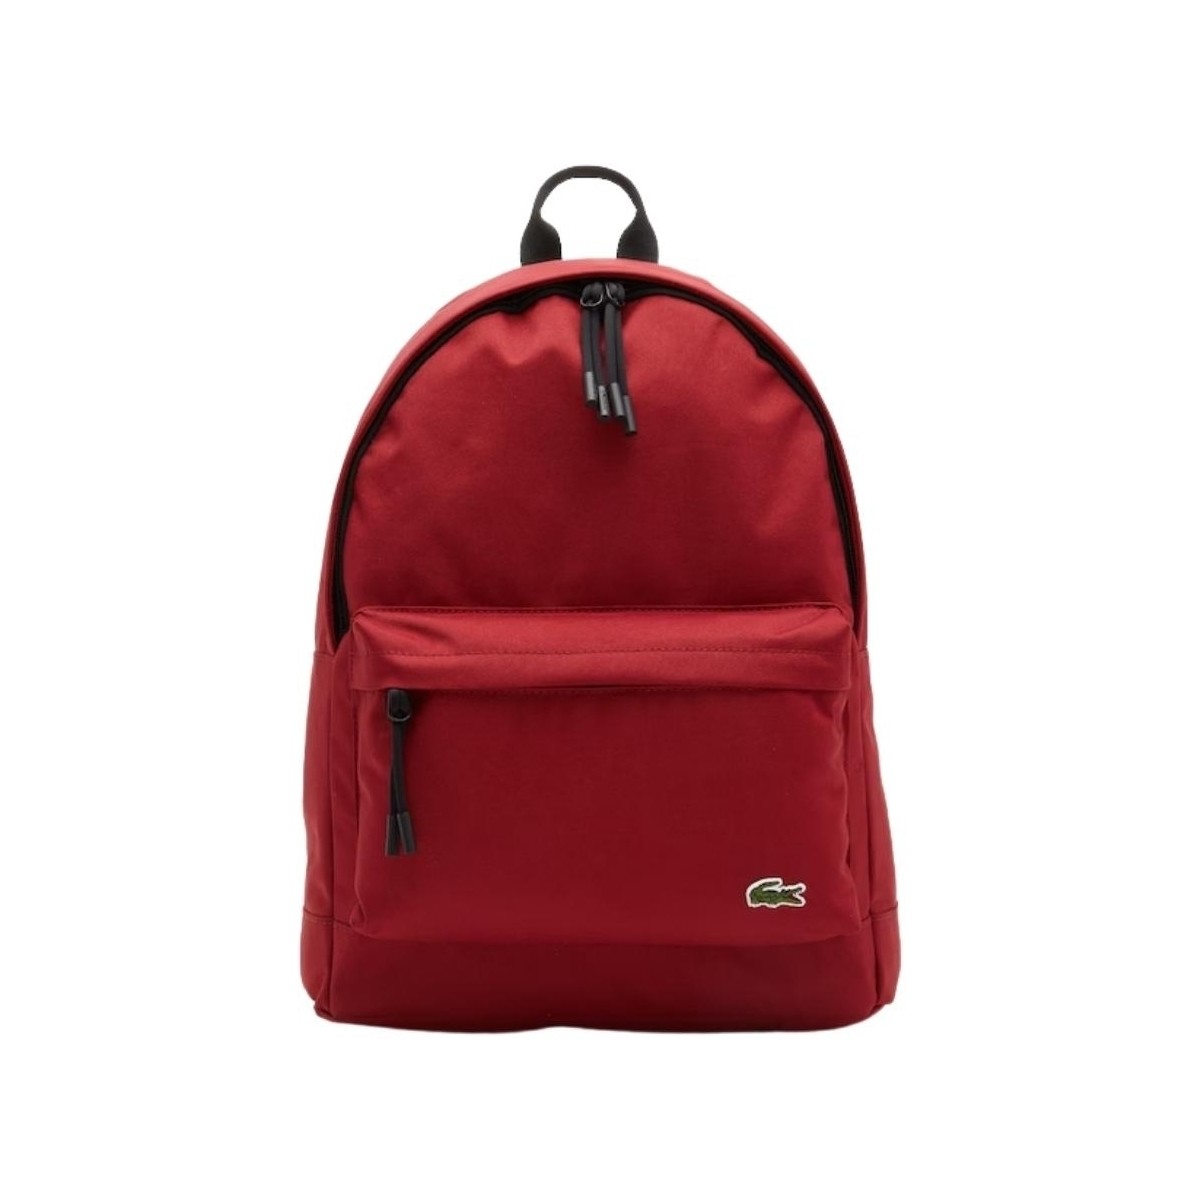 Sacs Homme Sacs à dos Lacoste Sac A dos Unisexe  Ref 57396 984 andrinople Rouge